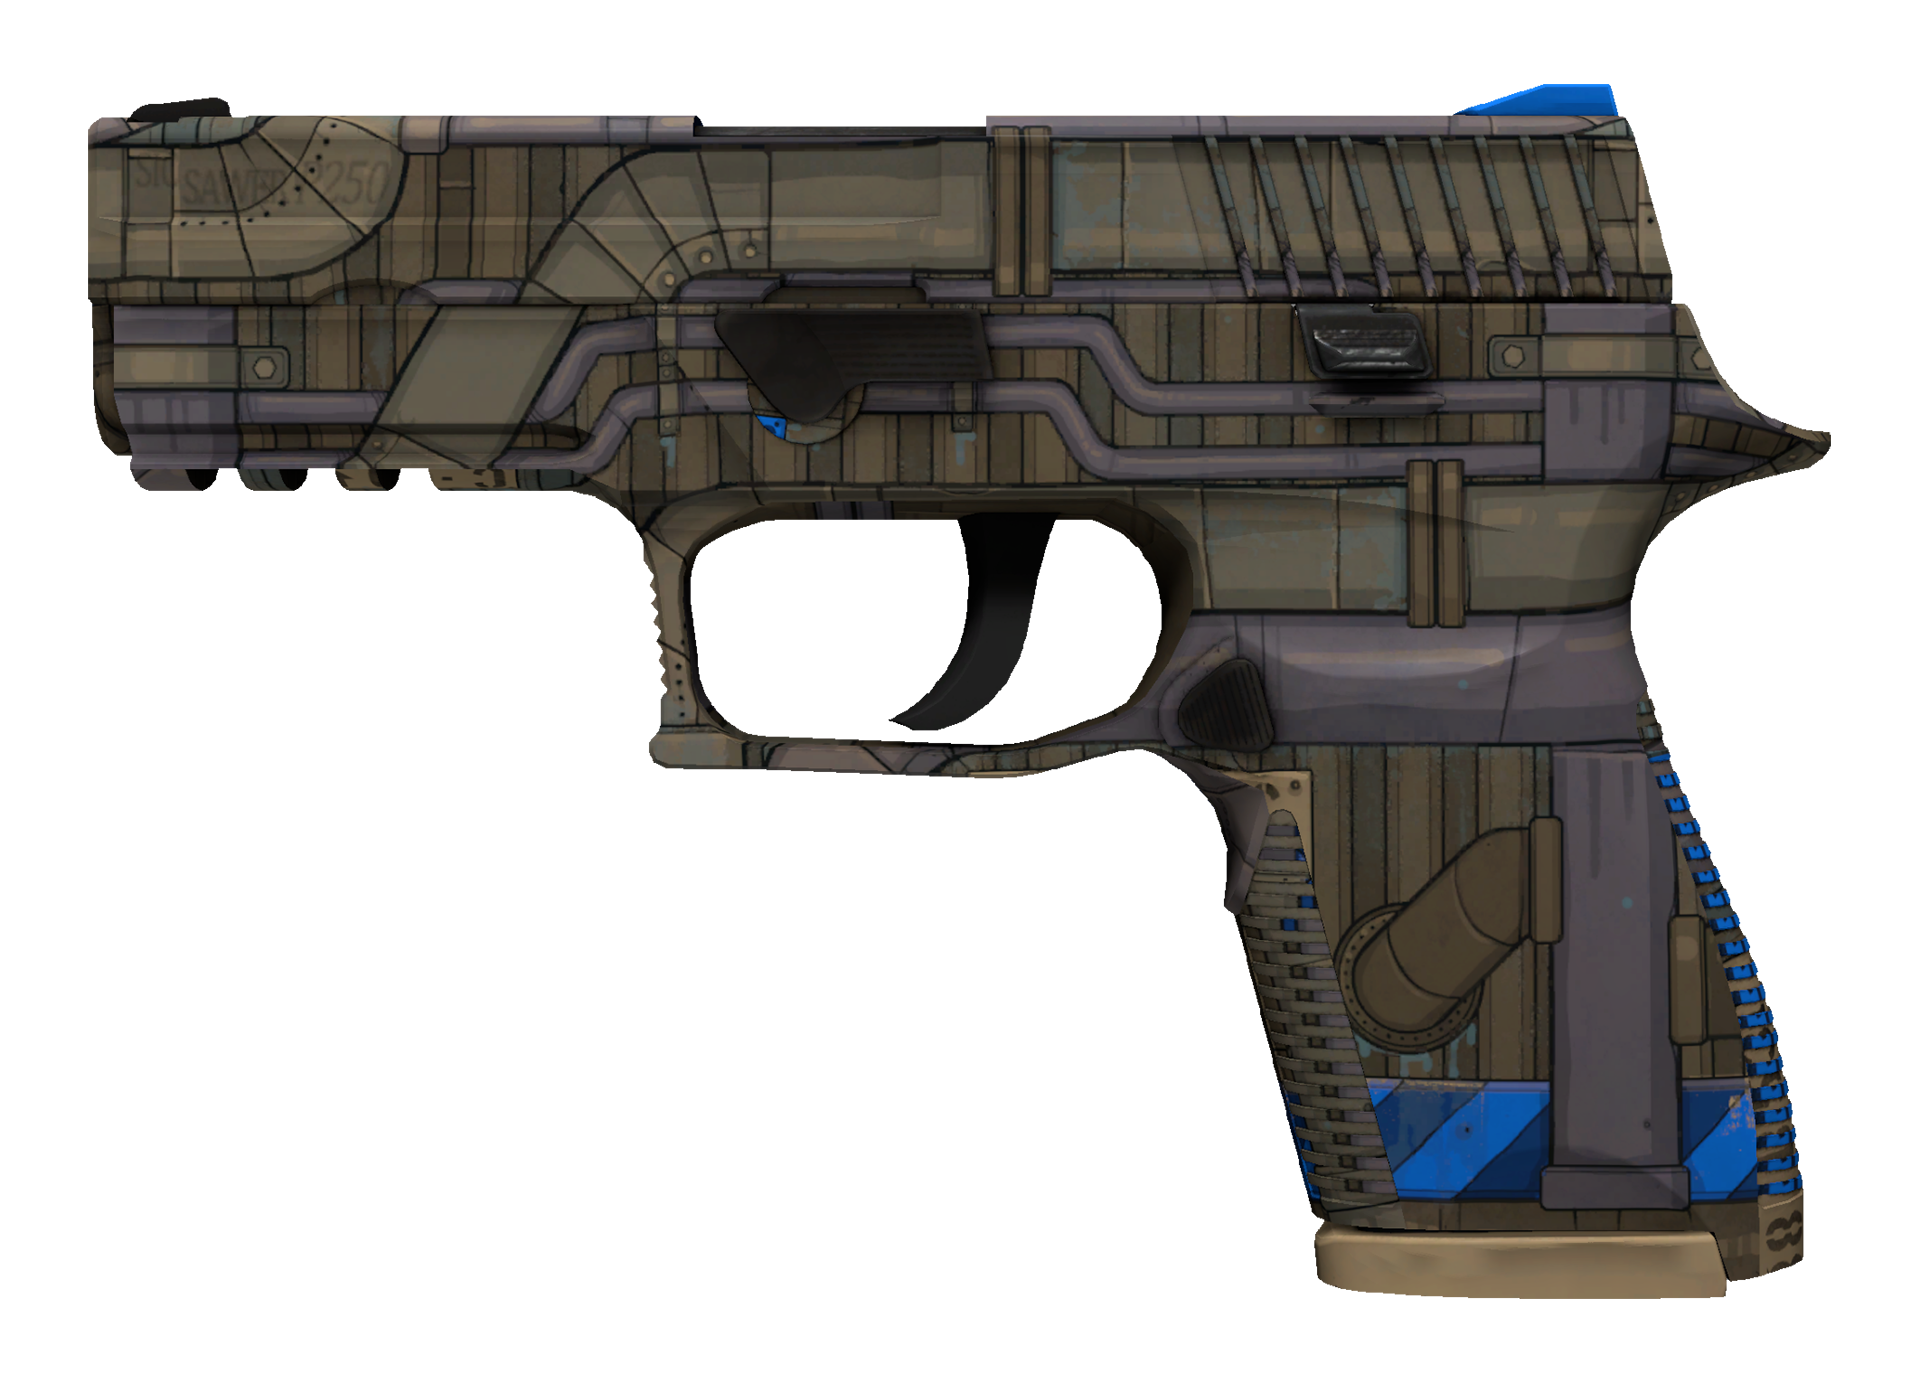 P250 Exchanger cs go skin instal the new version for android